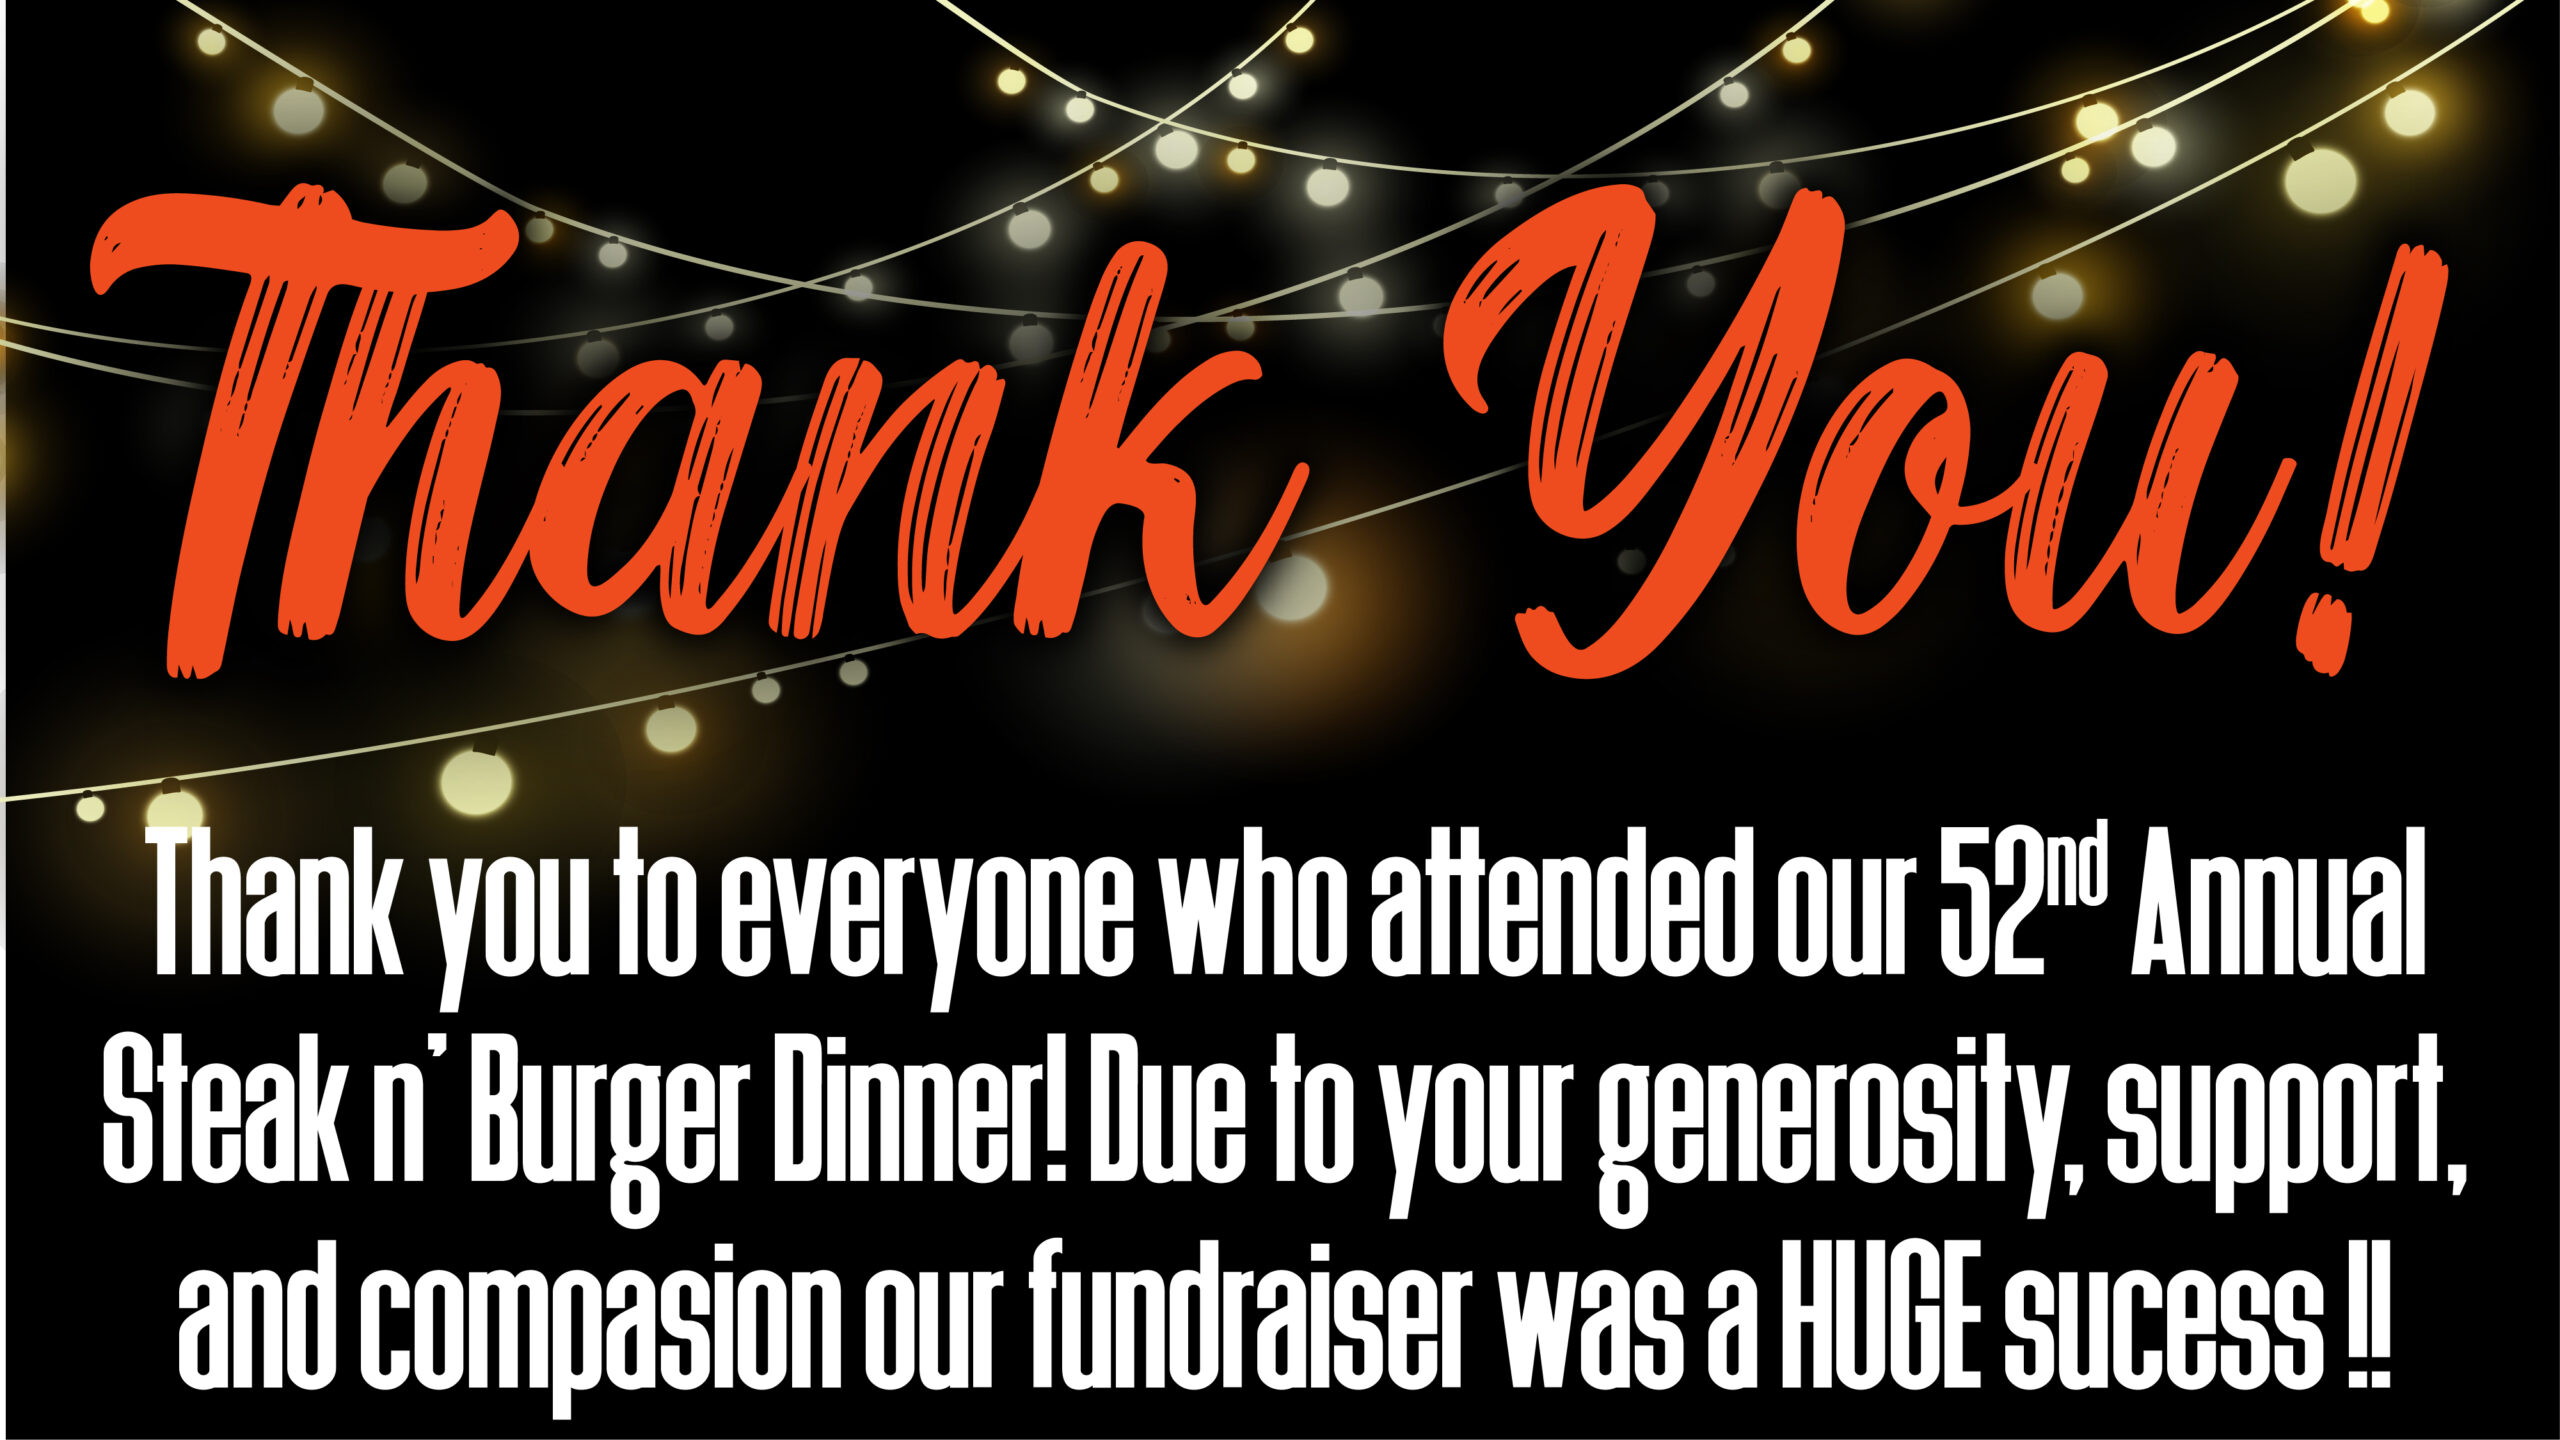 Thank you to everyone who attended our 52nd Steak n' Burger Dinner!